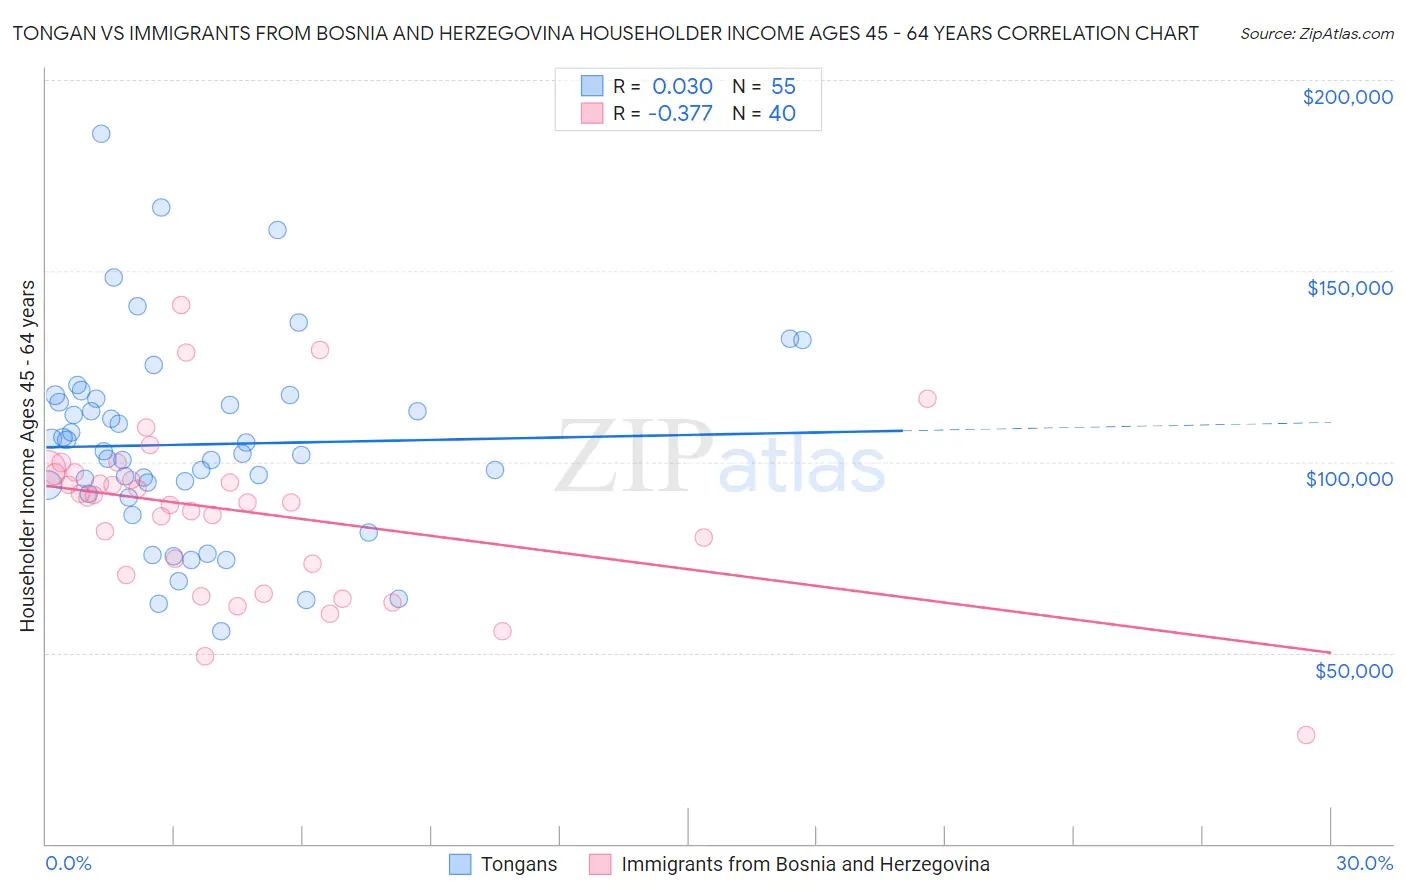 Tongan vs Immigrants from Bosnia and Herzegovina Householder Income Ages 45 - 64 years